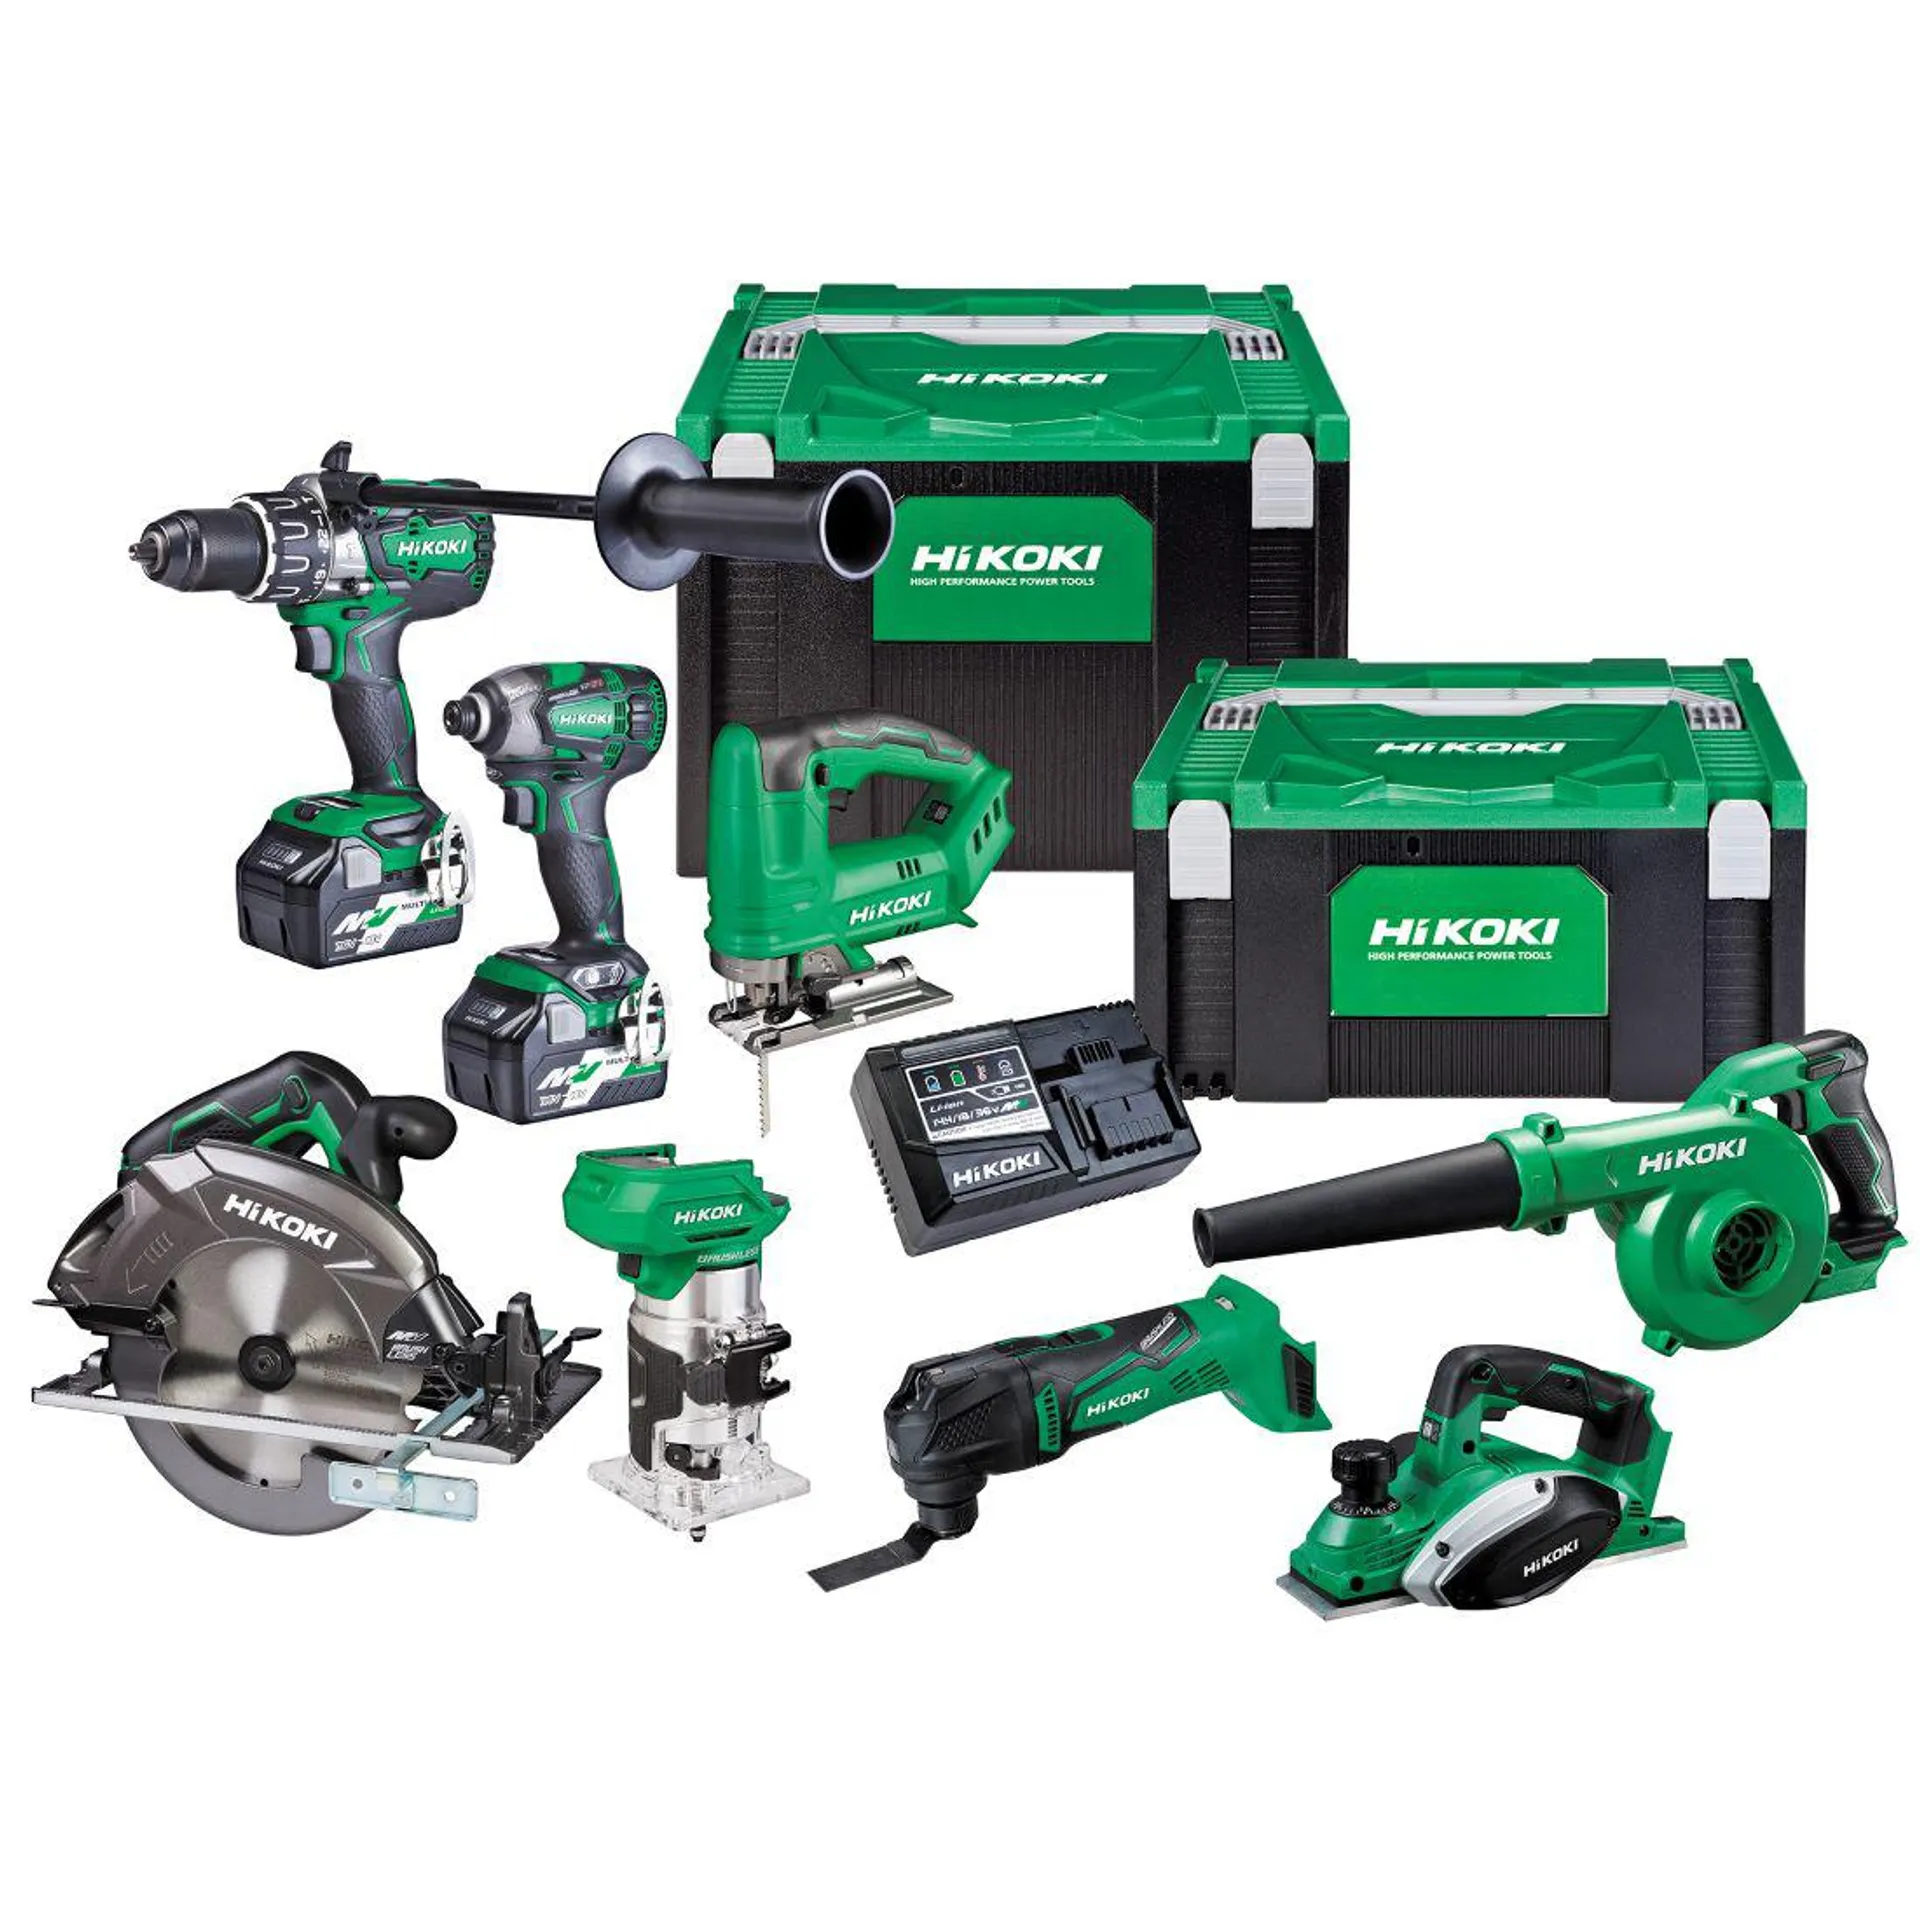 Tool Kit 8-Piece With Planer and Jigsaw 18V/36V Brushless KC36188DC(GRZ)